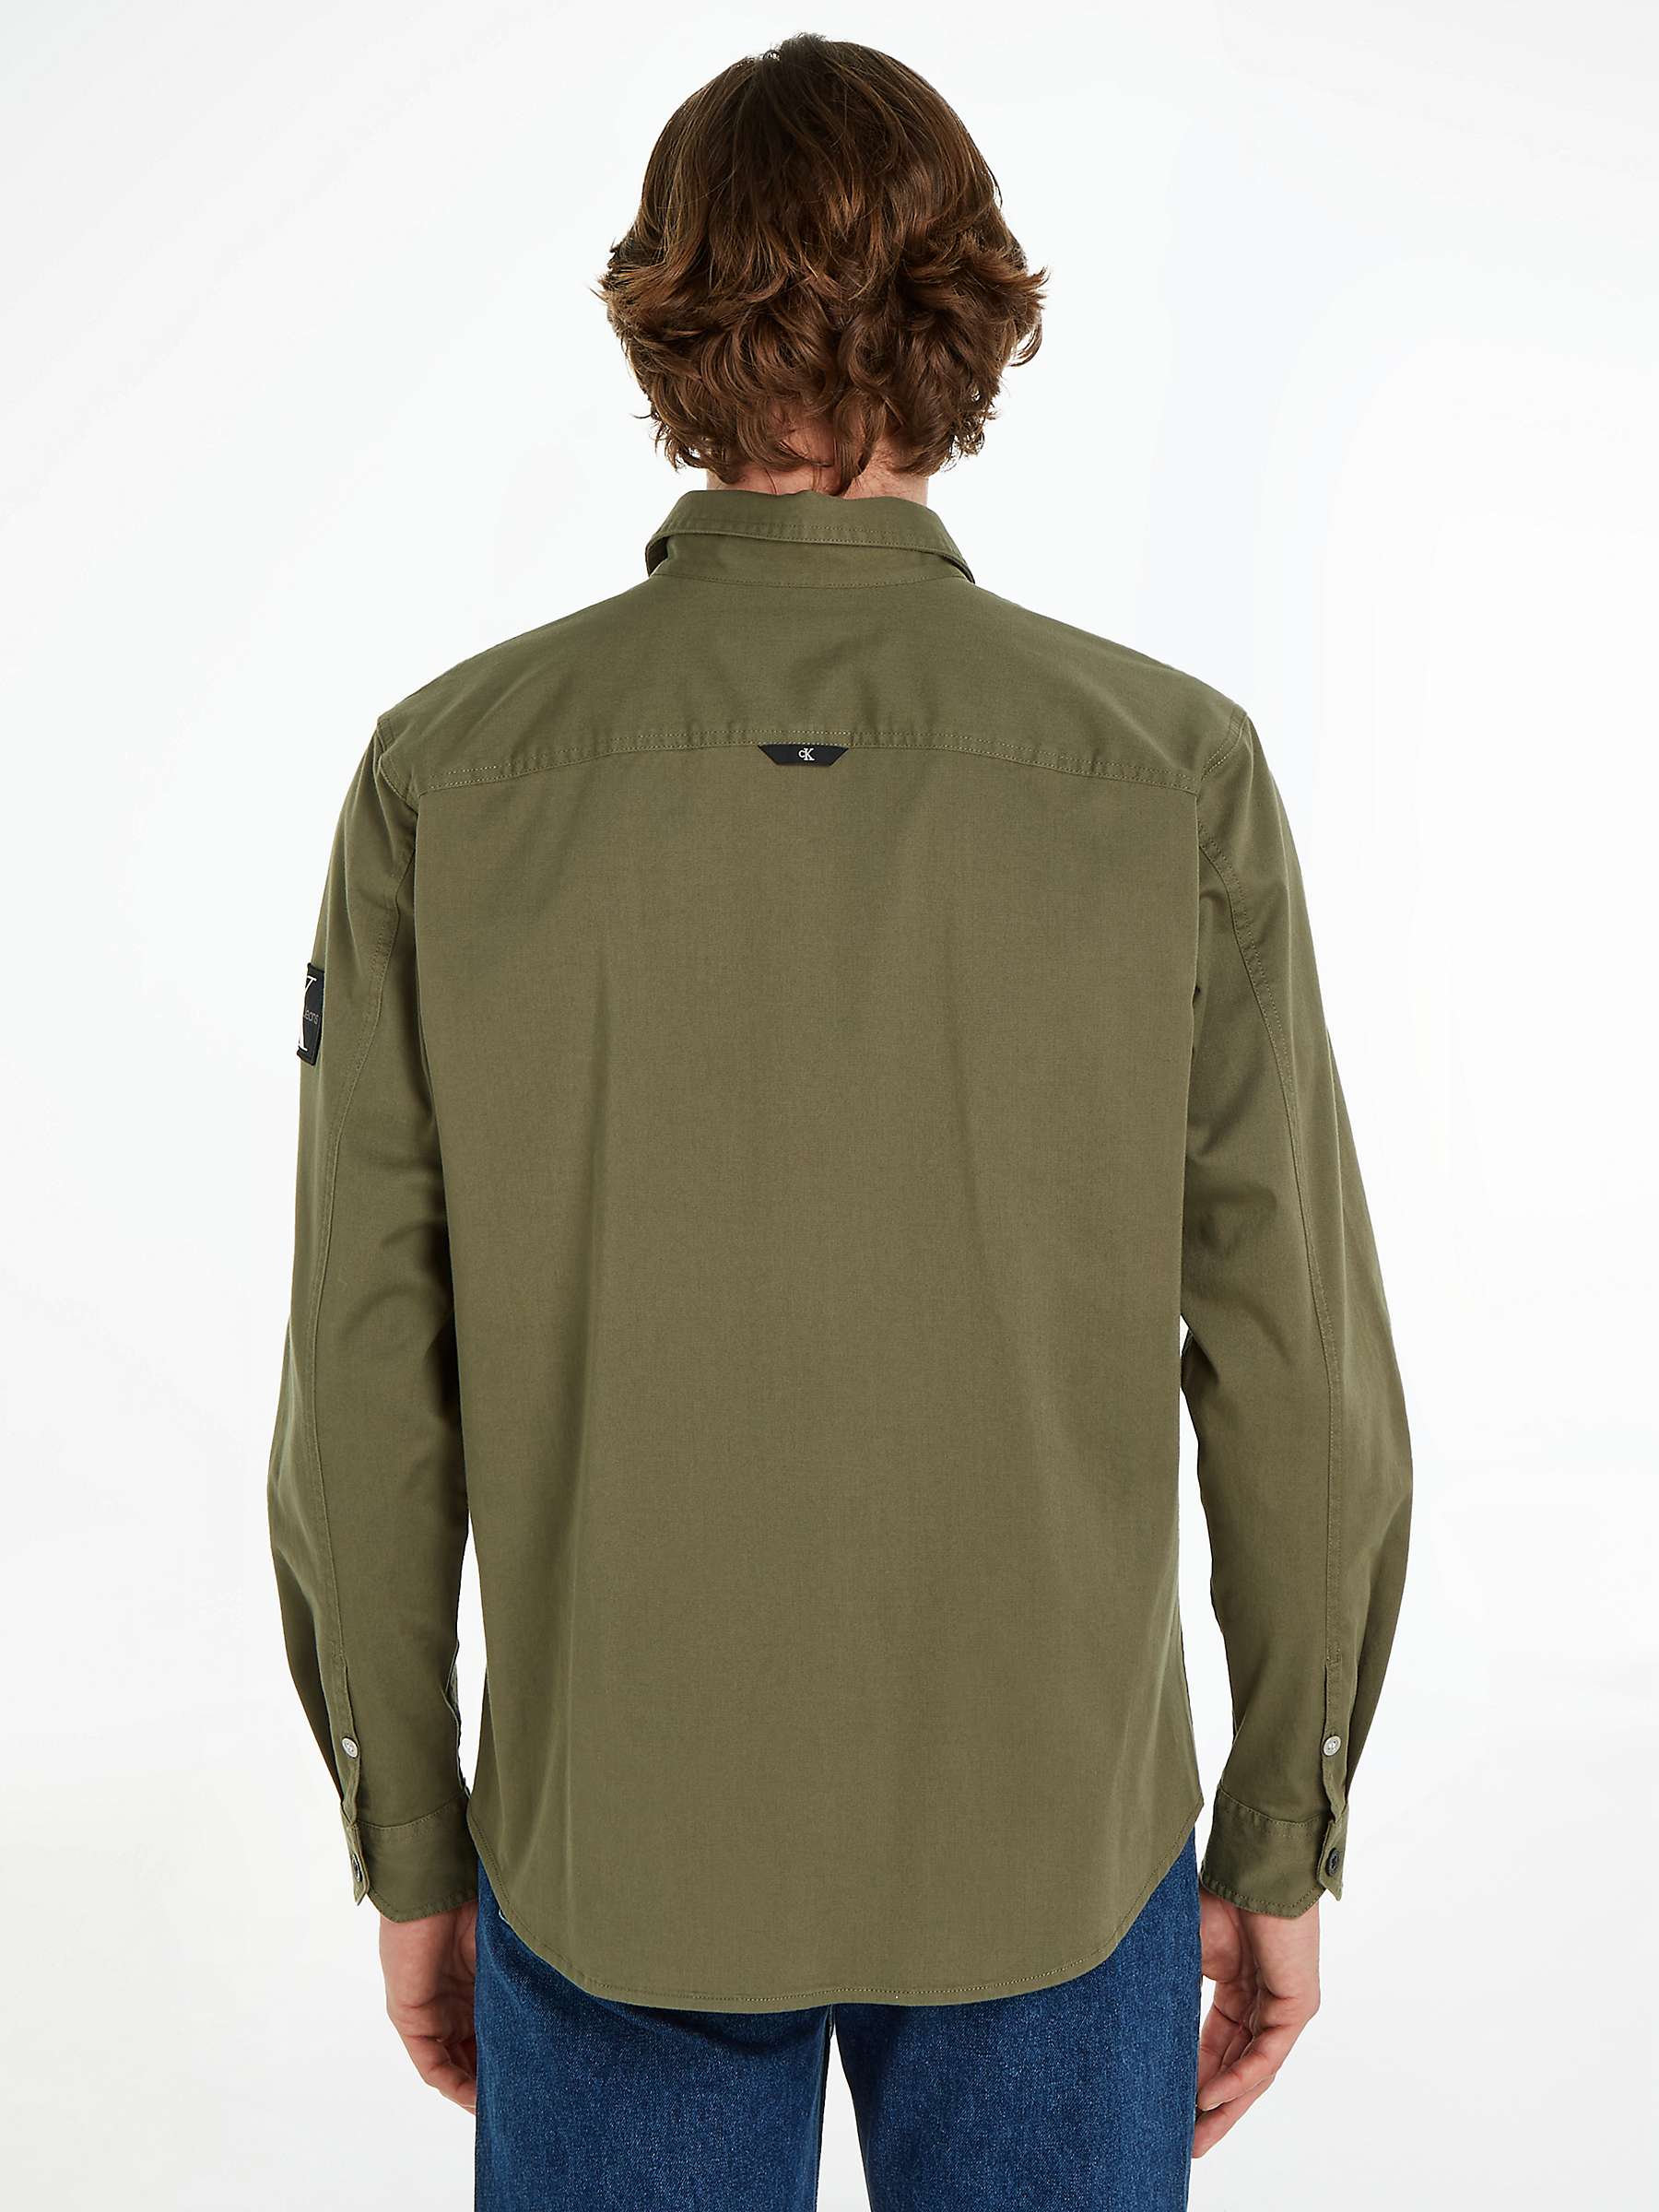 Buy Calvin Klein Jeans Relaxed Monologo Shirt, Dusty Olive Online at johnlewis.com